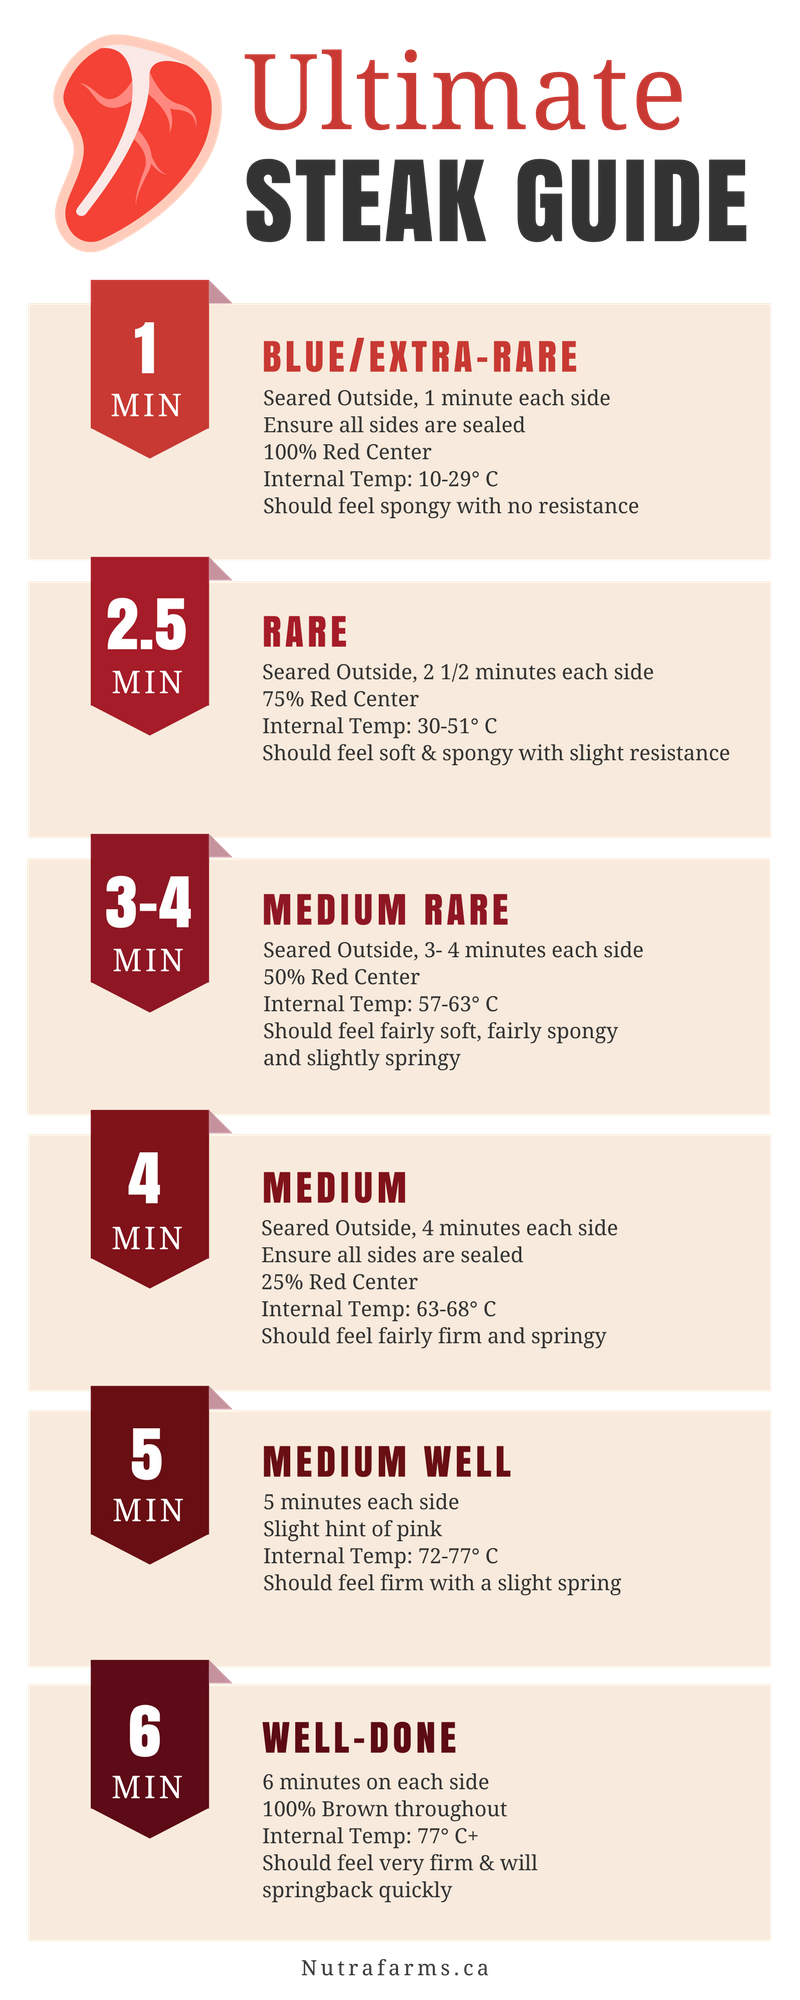 Recipes - 30 minute meals and organic recipes from Nutrafarms - Steak Guide Timeline Infographics